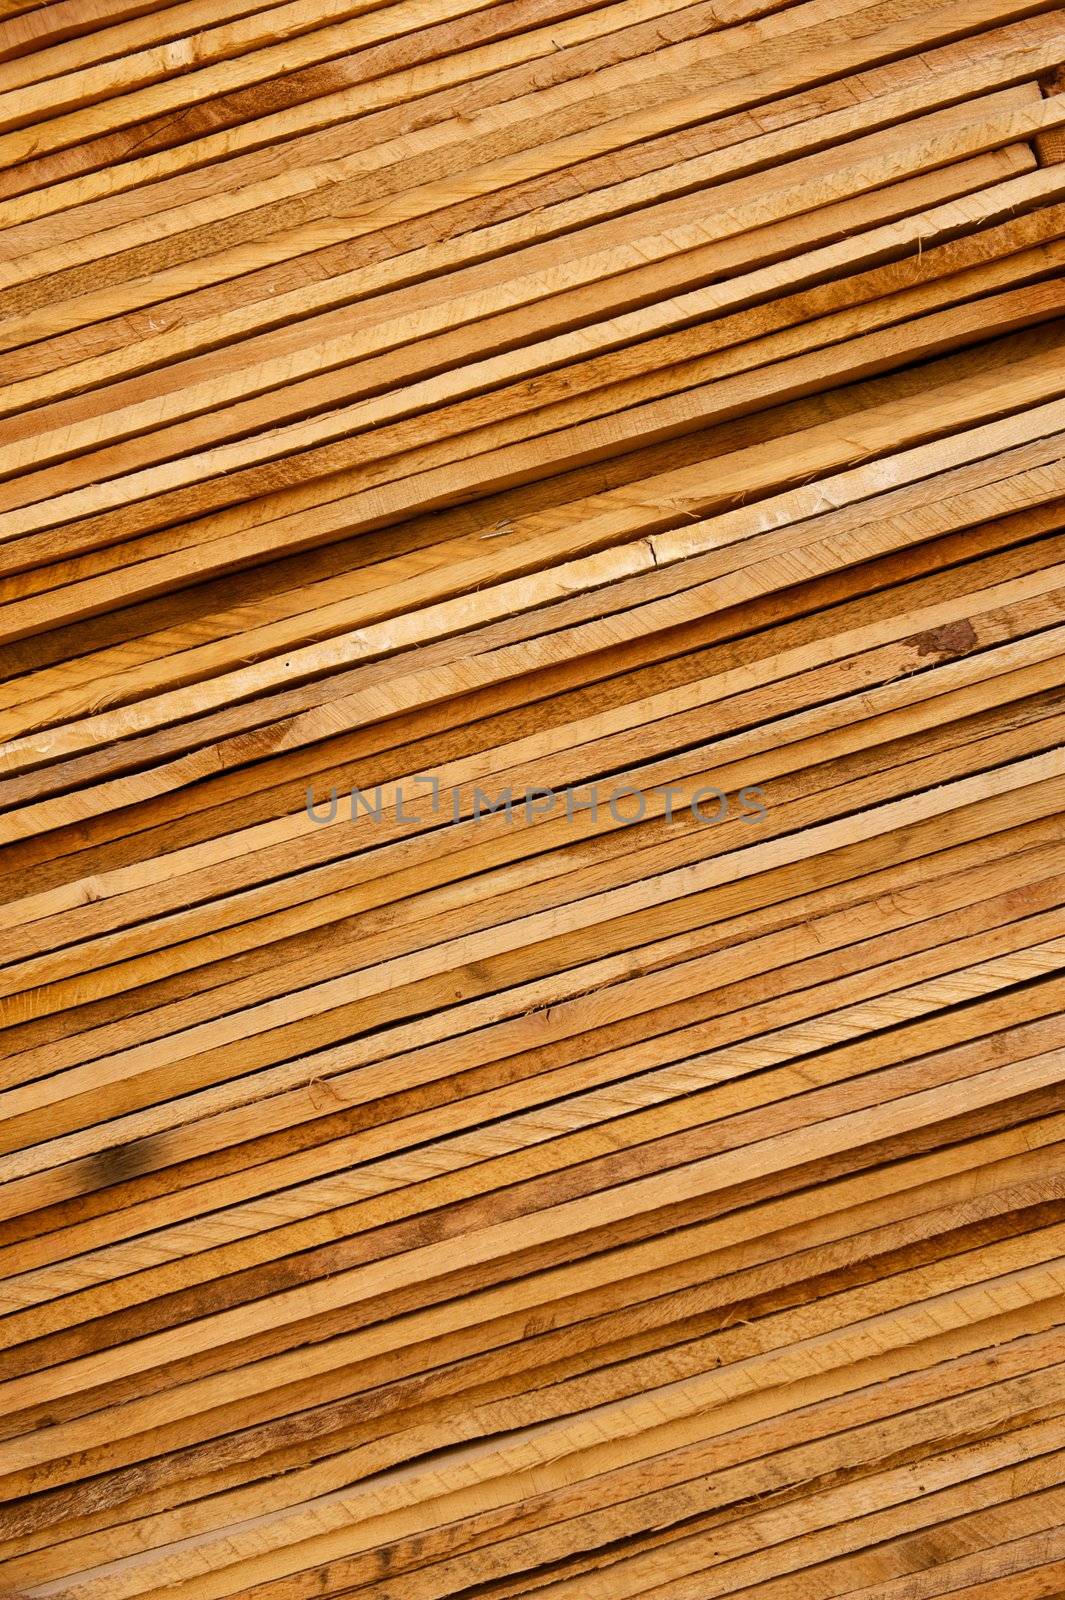 Slanted Stack of Wooden Planks Background by pixelsnap